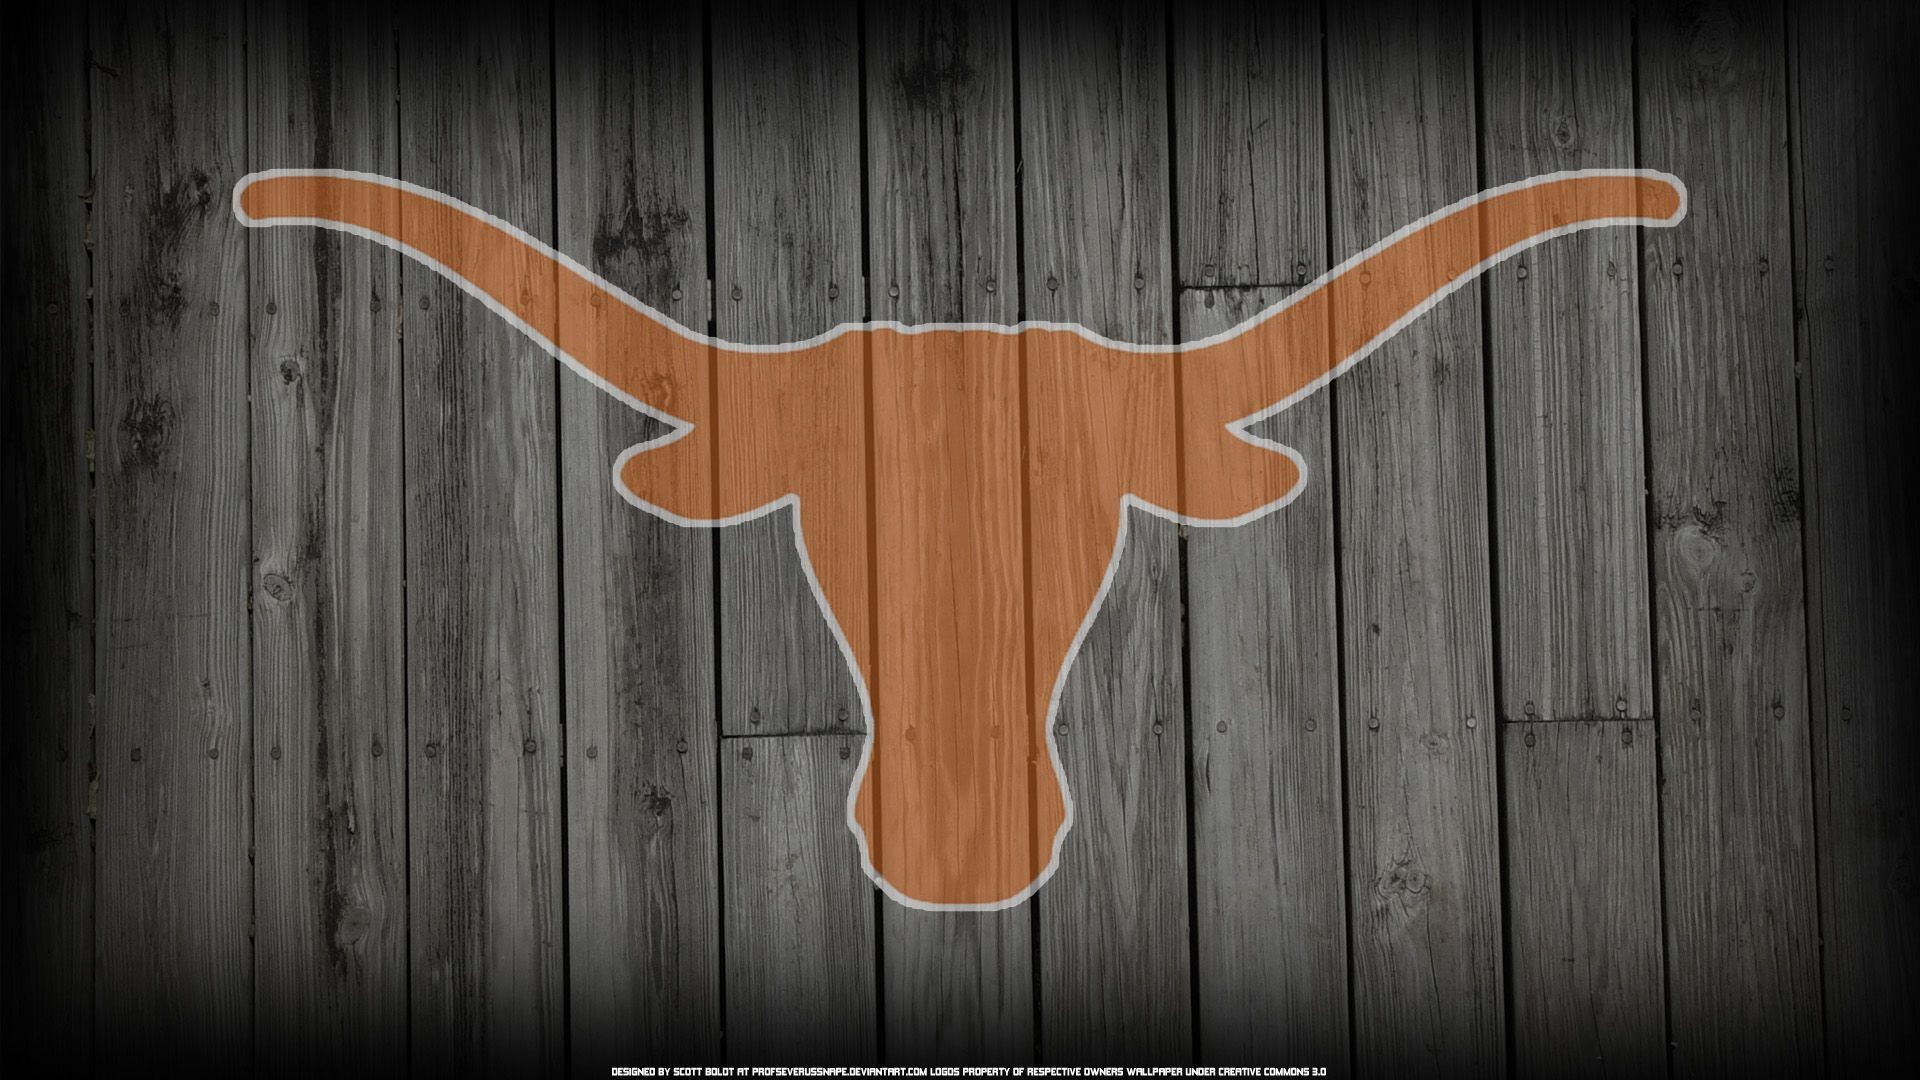 Texas Longhorns football players demand changes before fall in light of  racial injustice | Texas HS Football